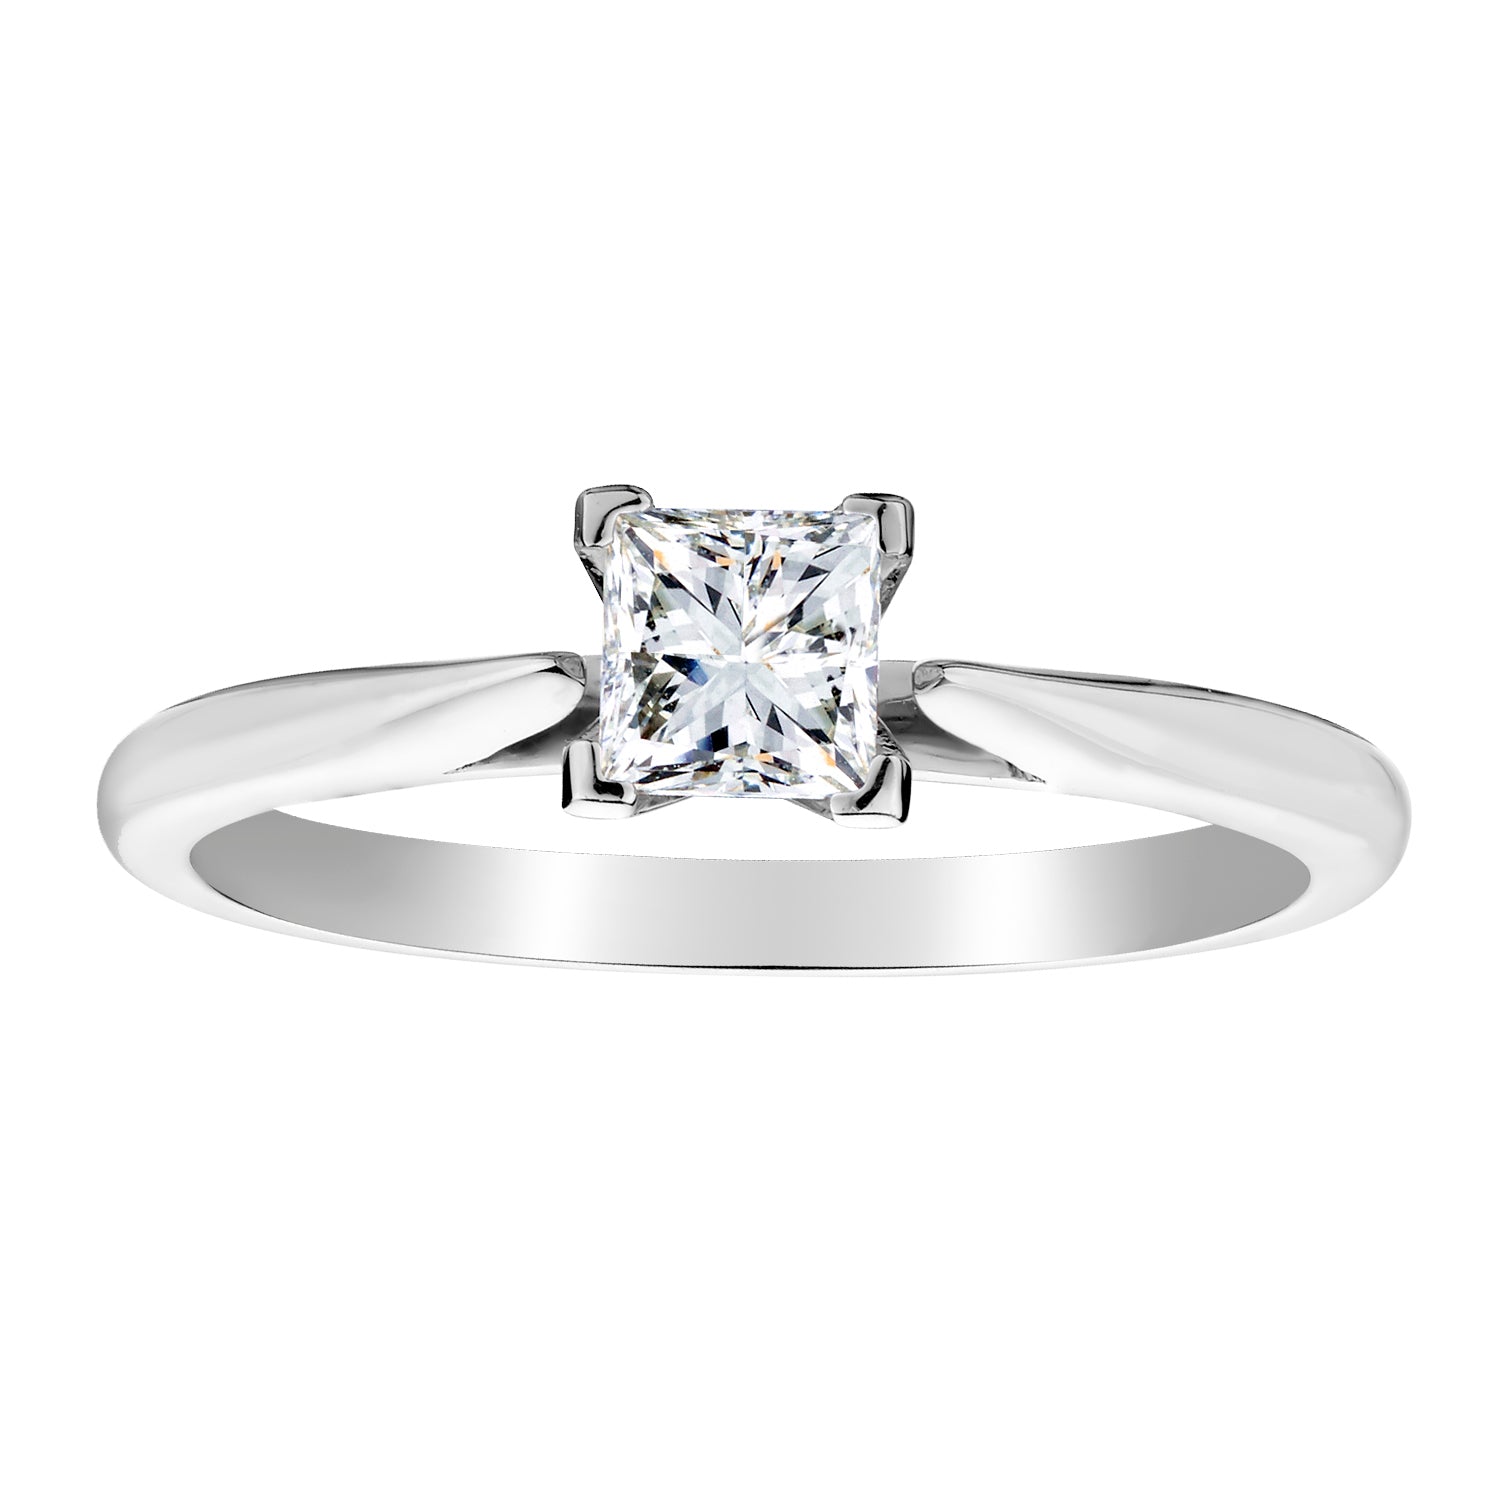 .50 Carat Canadian Princess Solitaire Diamond Ring,  14kt White Gold. Griffin Jewellery Designs